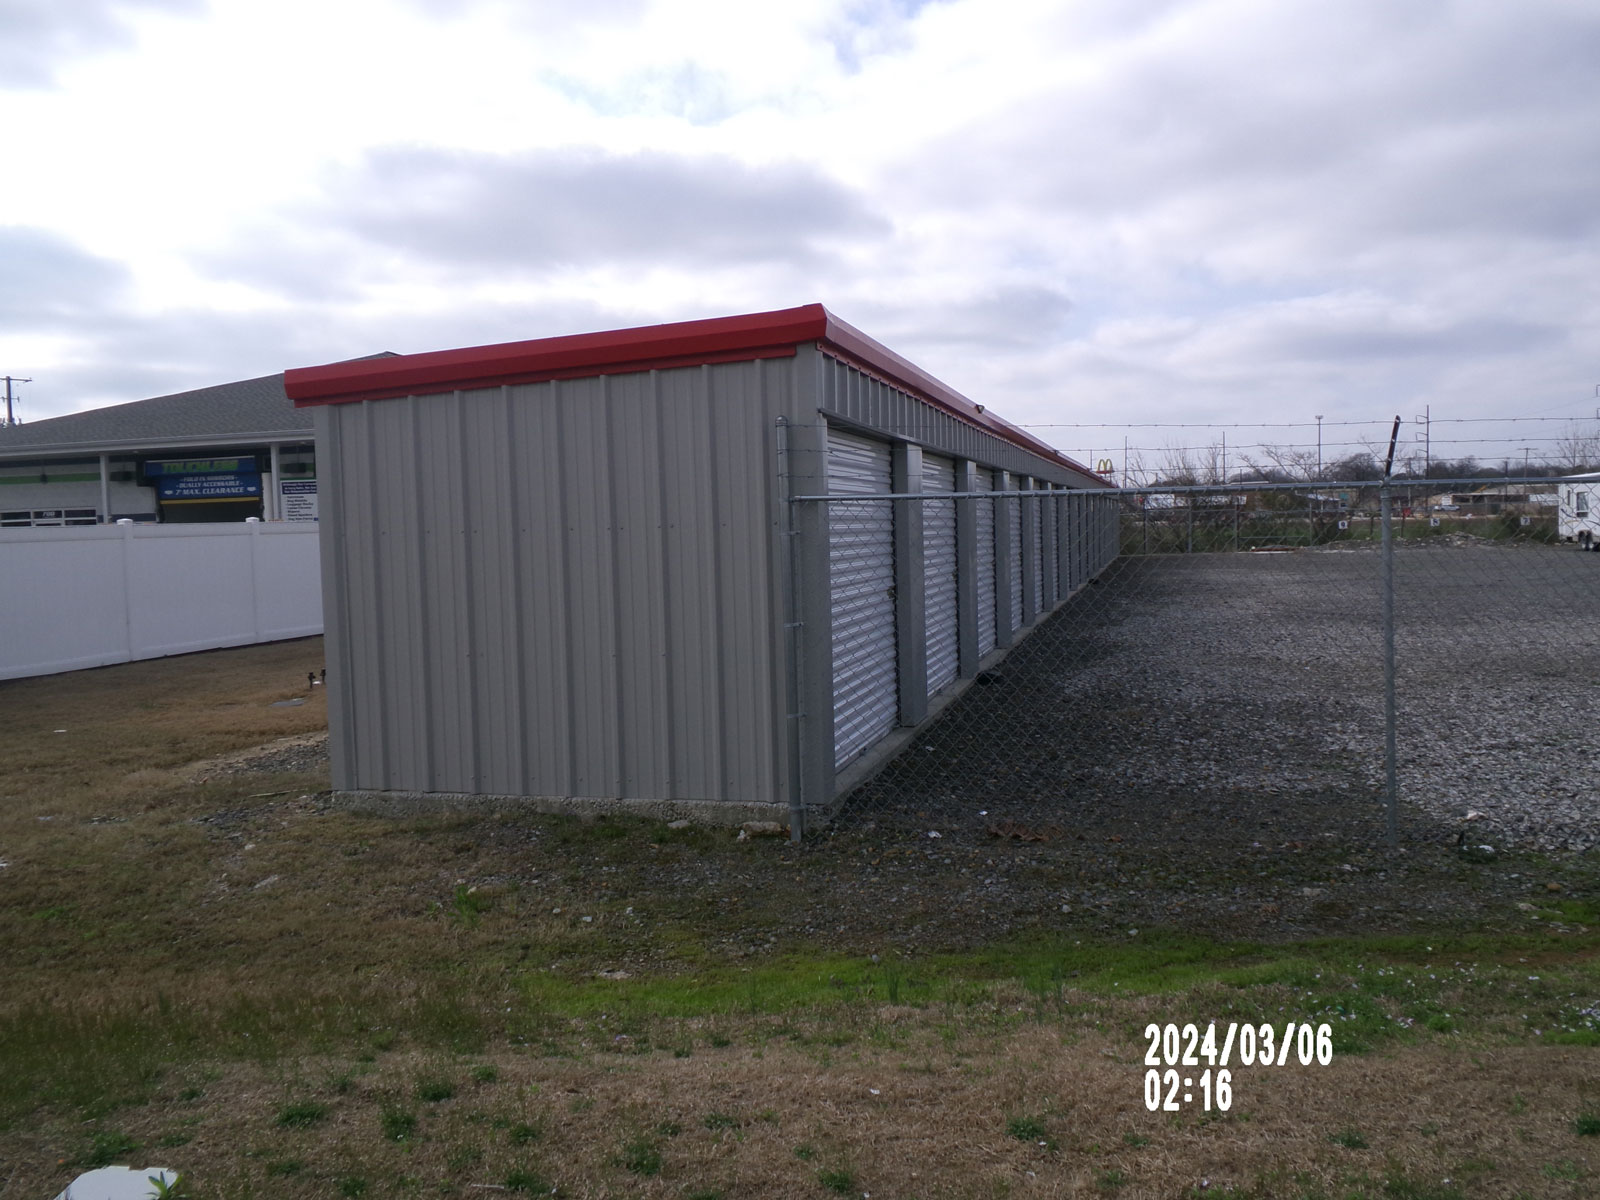 Storage unit facility10’x160’x8’-6”’
Cold form frame
29 gauge roof
26 gauge walls
Gutters and downspouts

Huntington In Approx location
8-8’x7’ roll up door